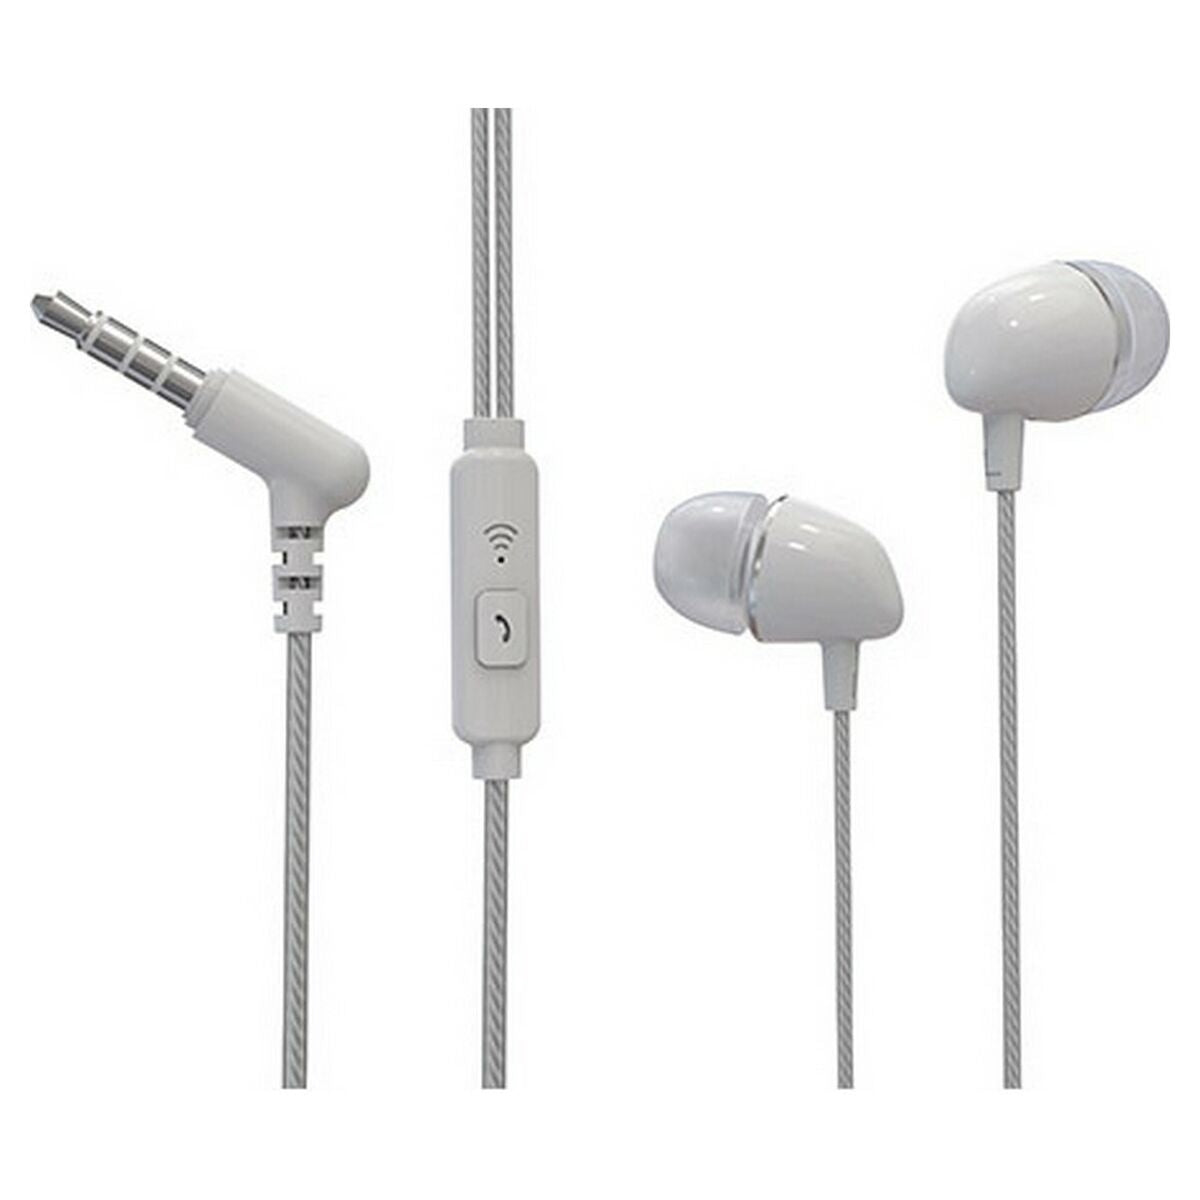 Headphones with Microphone TM Electron White, TM Electron, Electronics, Mobile communication and accessories, headphones-with-microphone-tm-electron-white, Brand_TM Electron, category-reference-2609, category-reference-2642, category-reference-2847, category-reference-t-19653, category-reference-t-21312, category-reference-t-4036, category-reference-t-4037, computers / peripherals, Condition_NEW, entertainment, gadget, music, office, Price_20 - 50, telephones & tablets, Teleworking, RiotNook